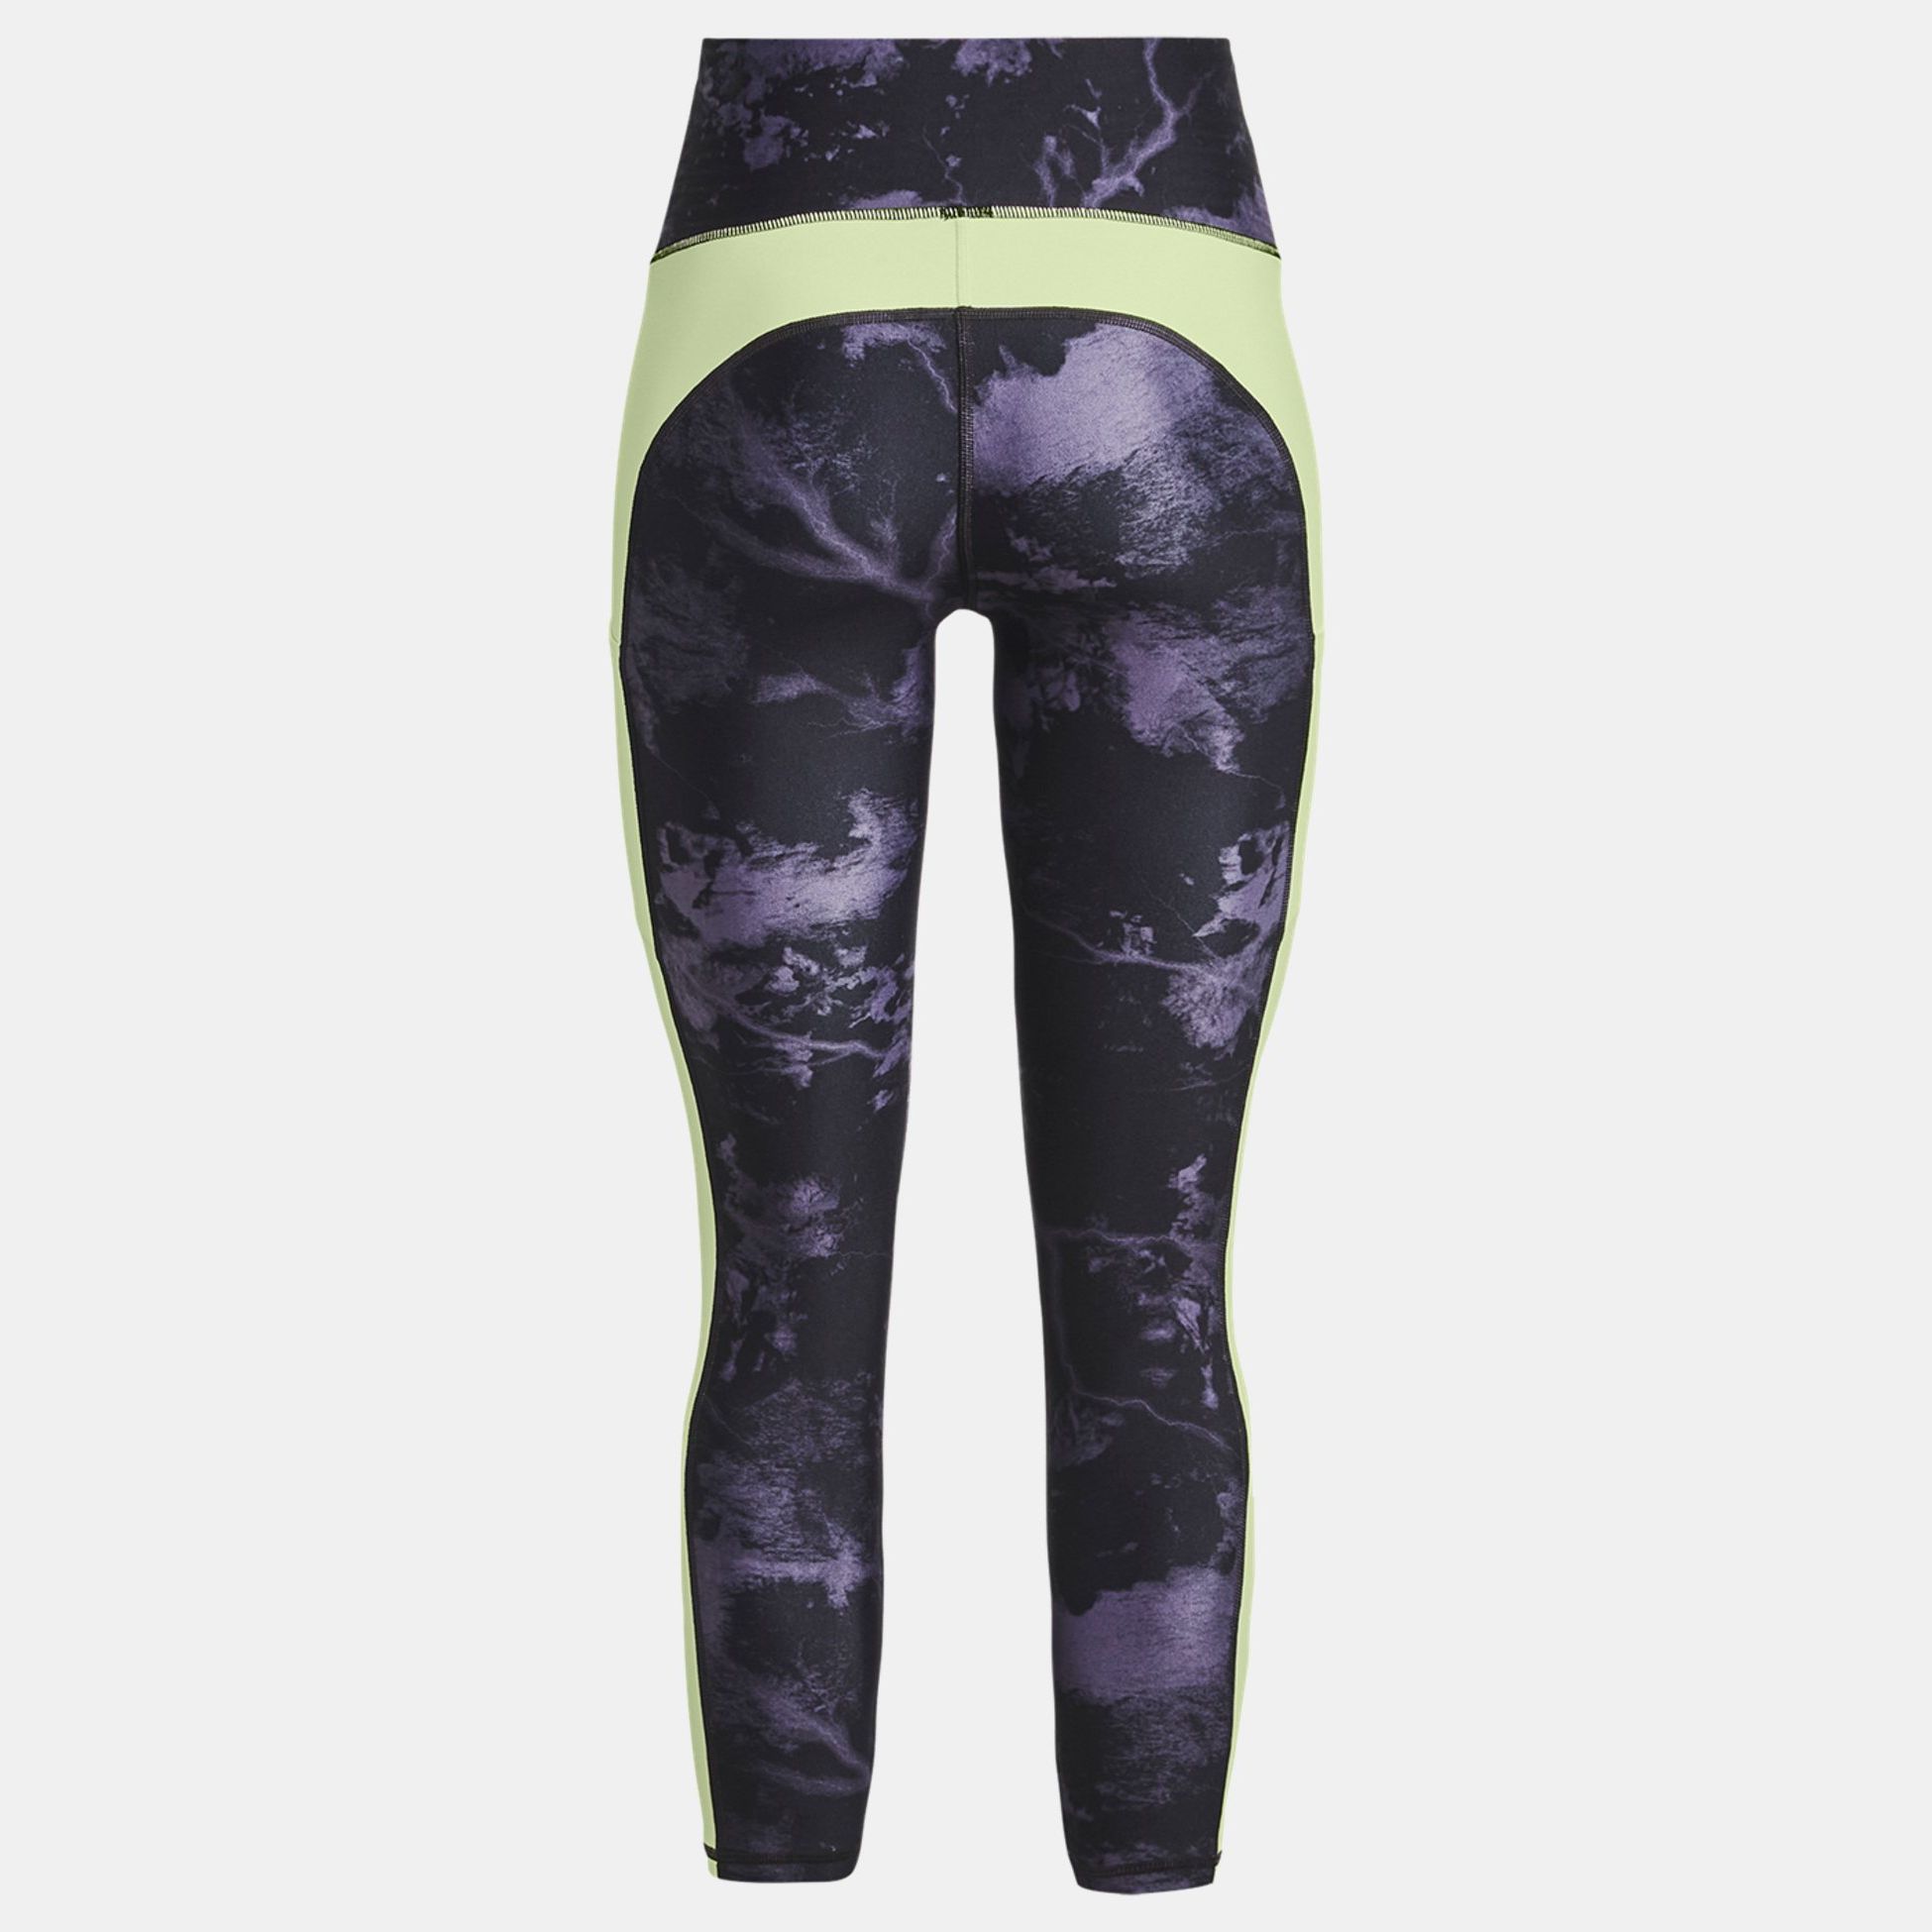 Womens compression leggings Under Armour OUTRUN THE COLD TIGHT W black